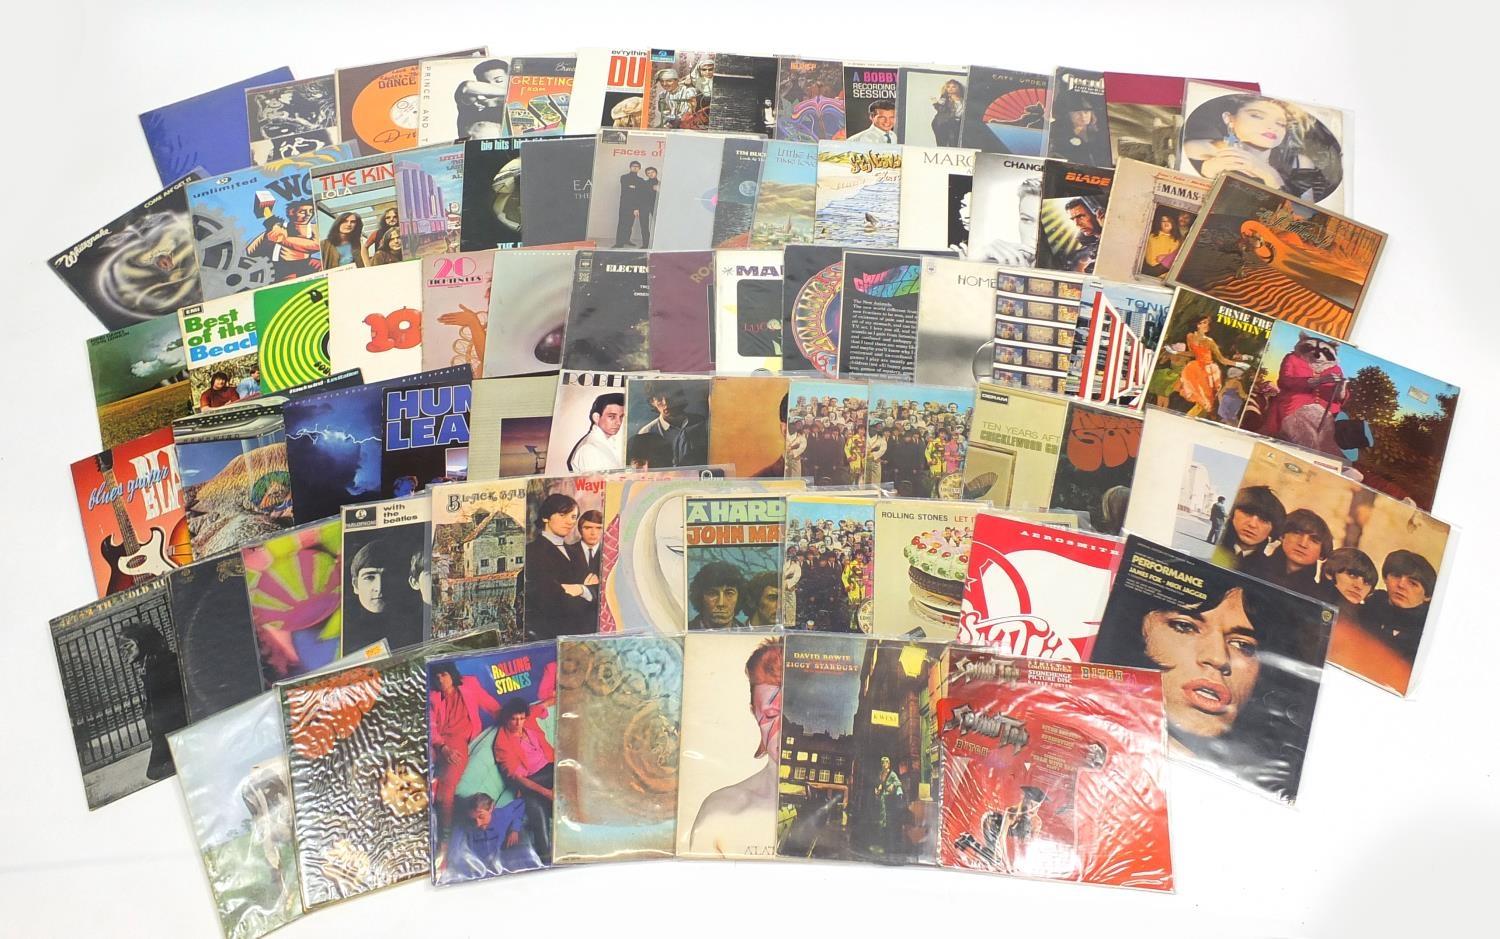 Vinyl LPs including The Beatles, The Rolling Stones, Pink Floyd, David Bowie and The Kinks :For